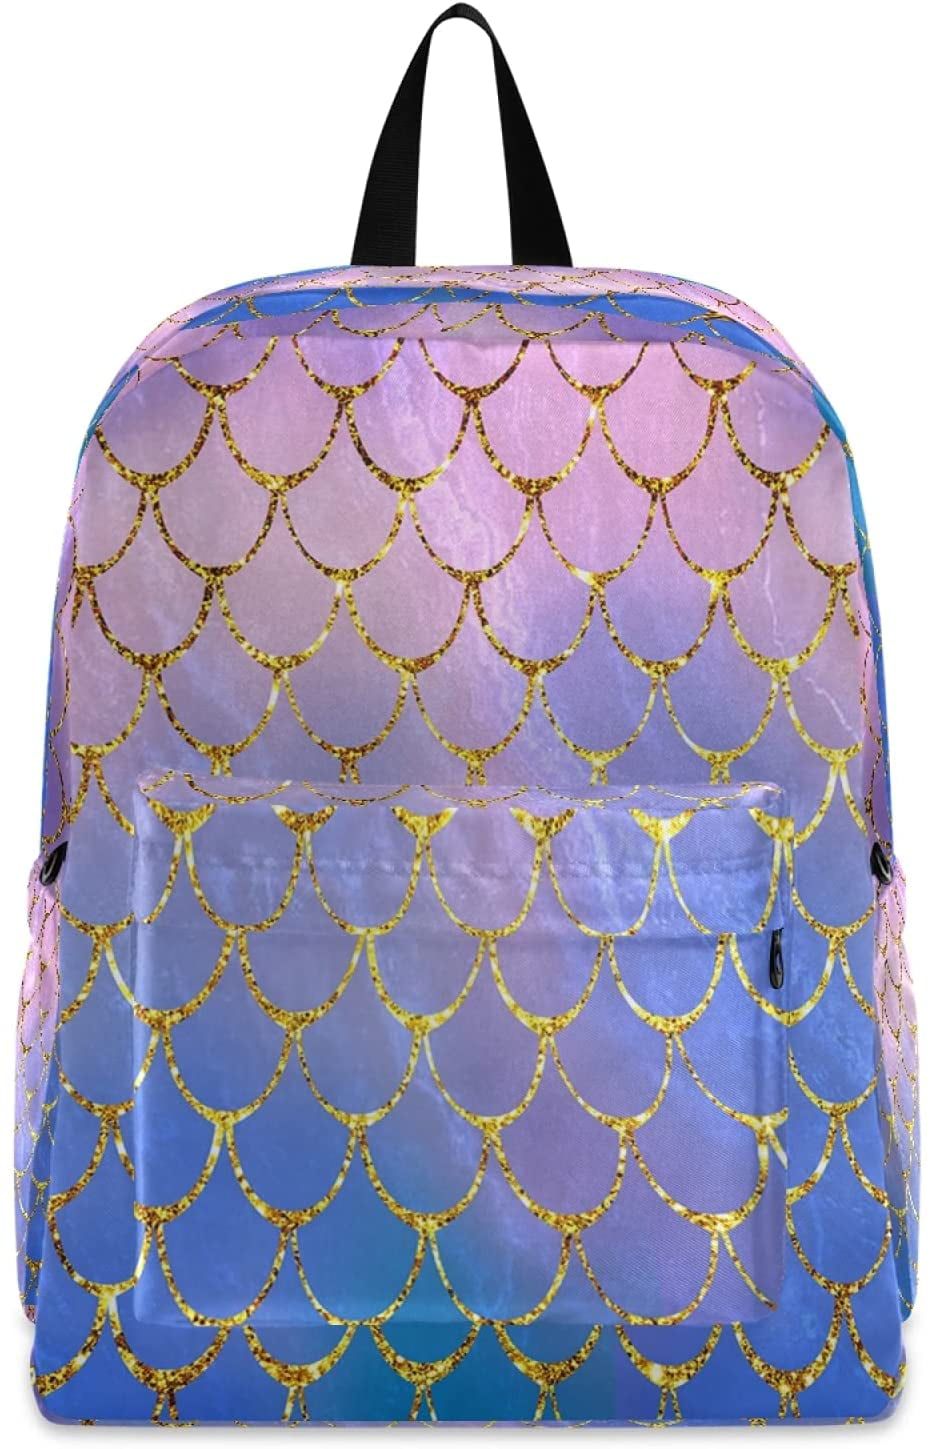 My Daily Fish Scale Mermaid Tail Backpack 14 Inch Laptop Daypack Bookbag for Travel College School 